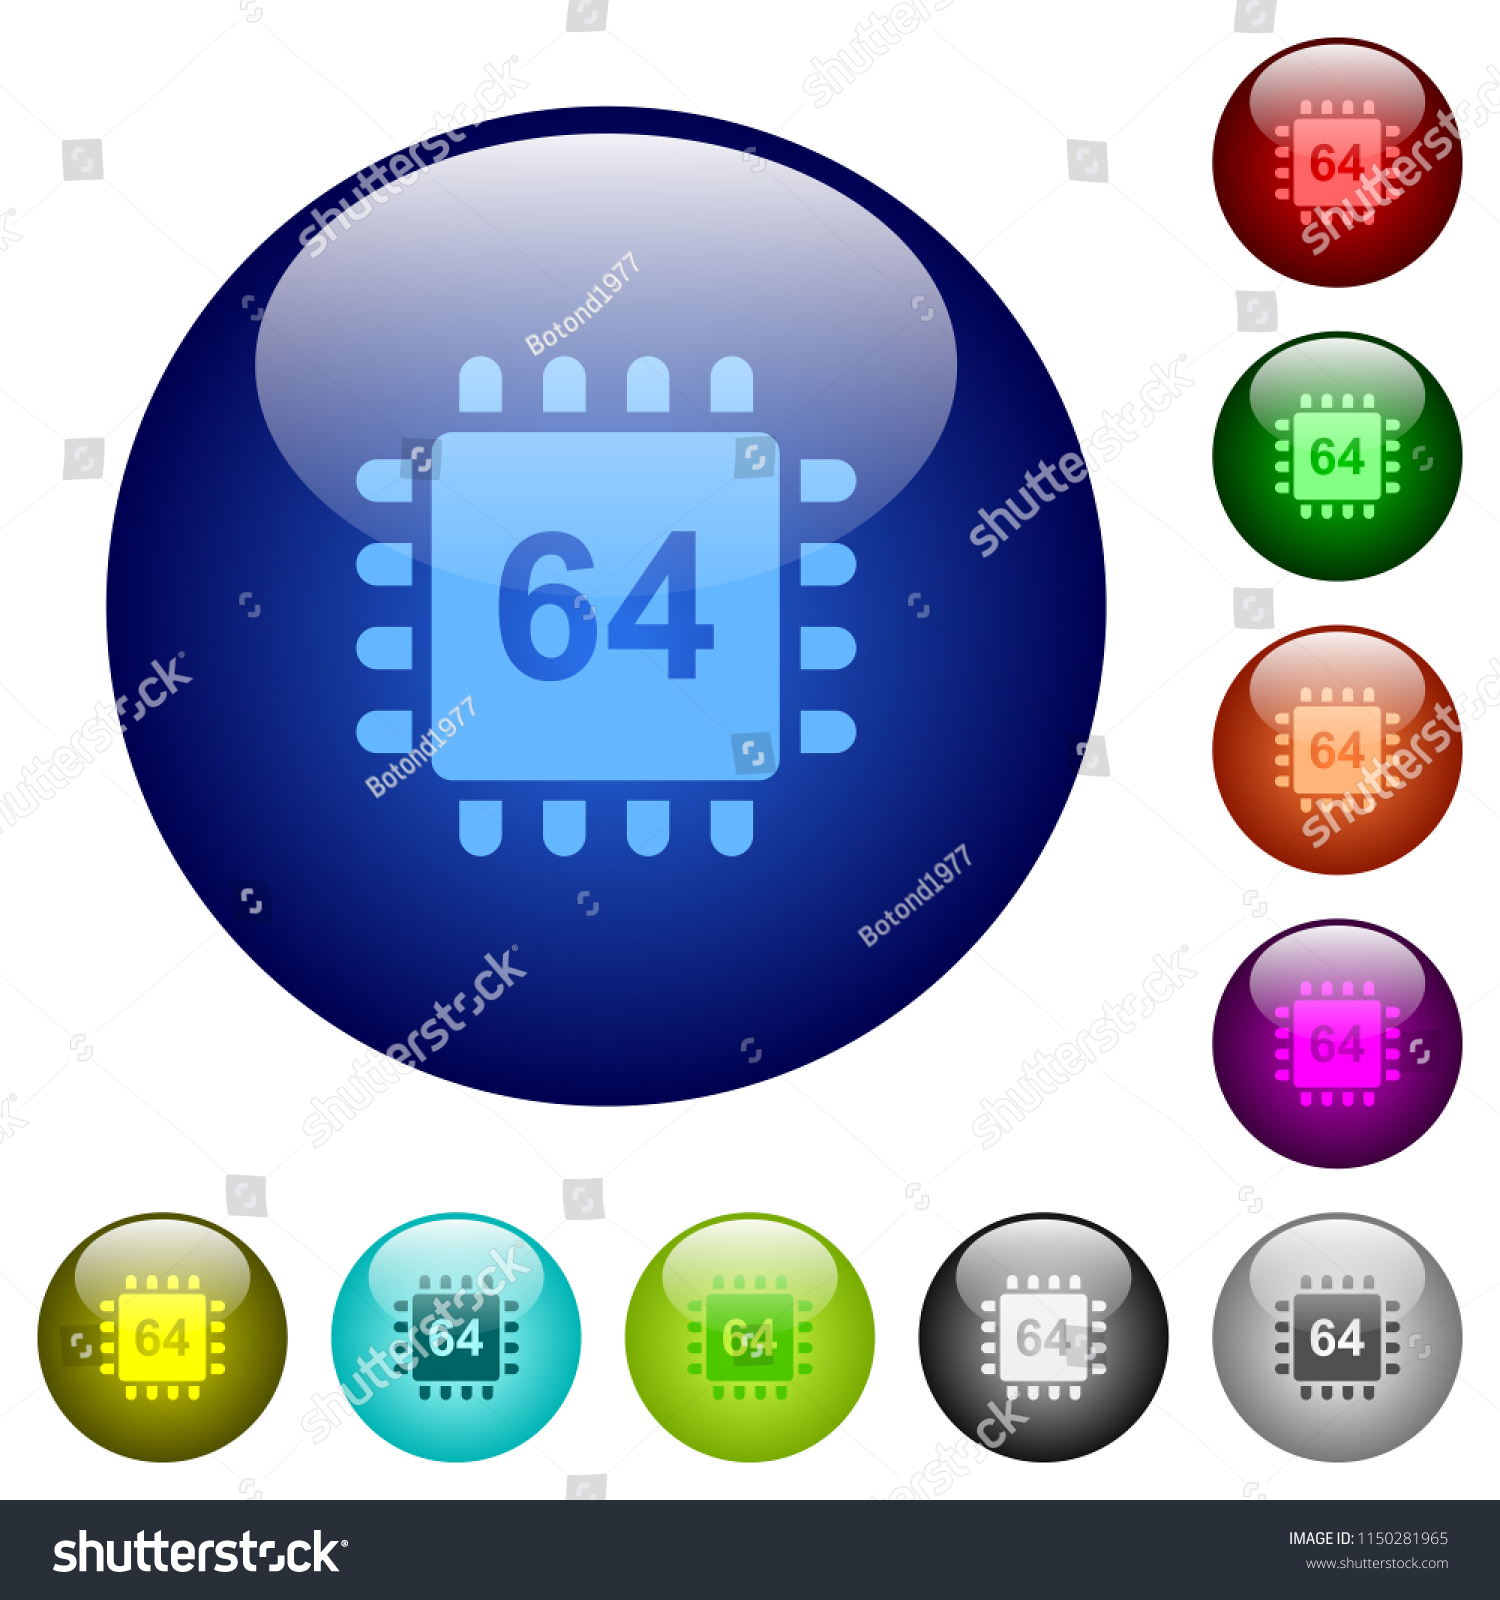 Microprocessor 64 bit architecture icons on round color glass buttons #1150281965